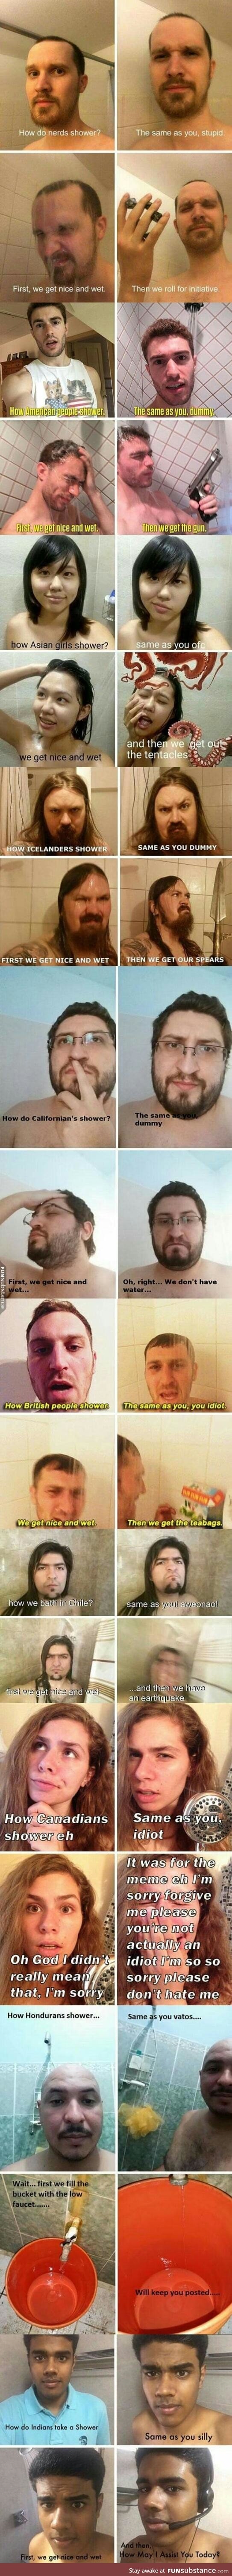 Showers in different countries